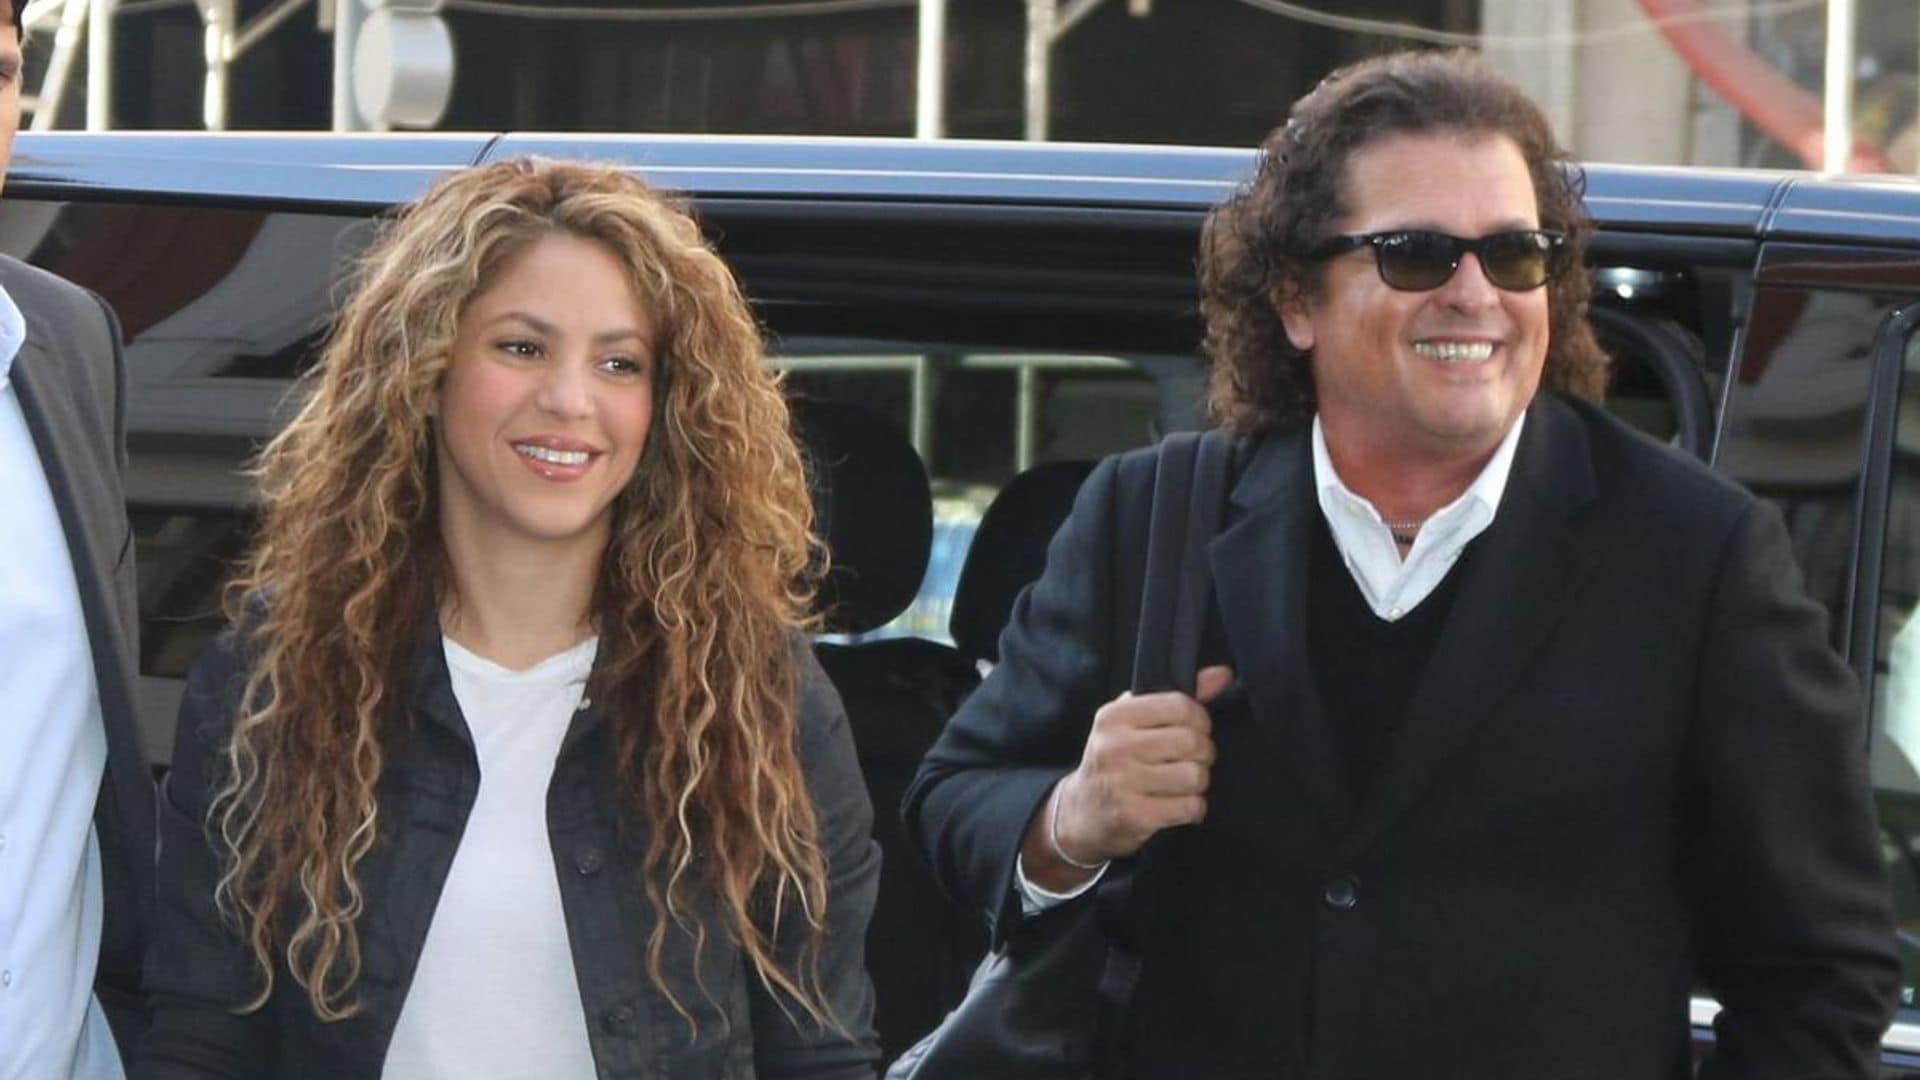 Carlos Vives defends Shakira: ‘It’s not that she’s hurt for no reason.’